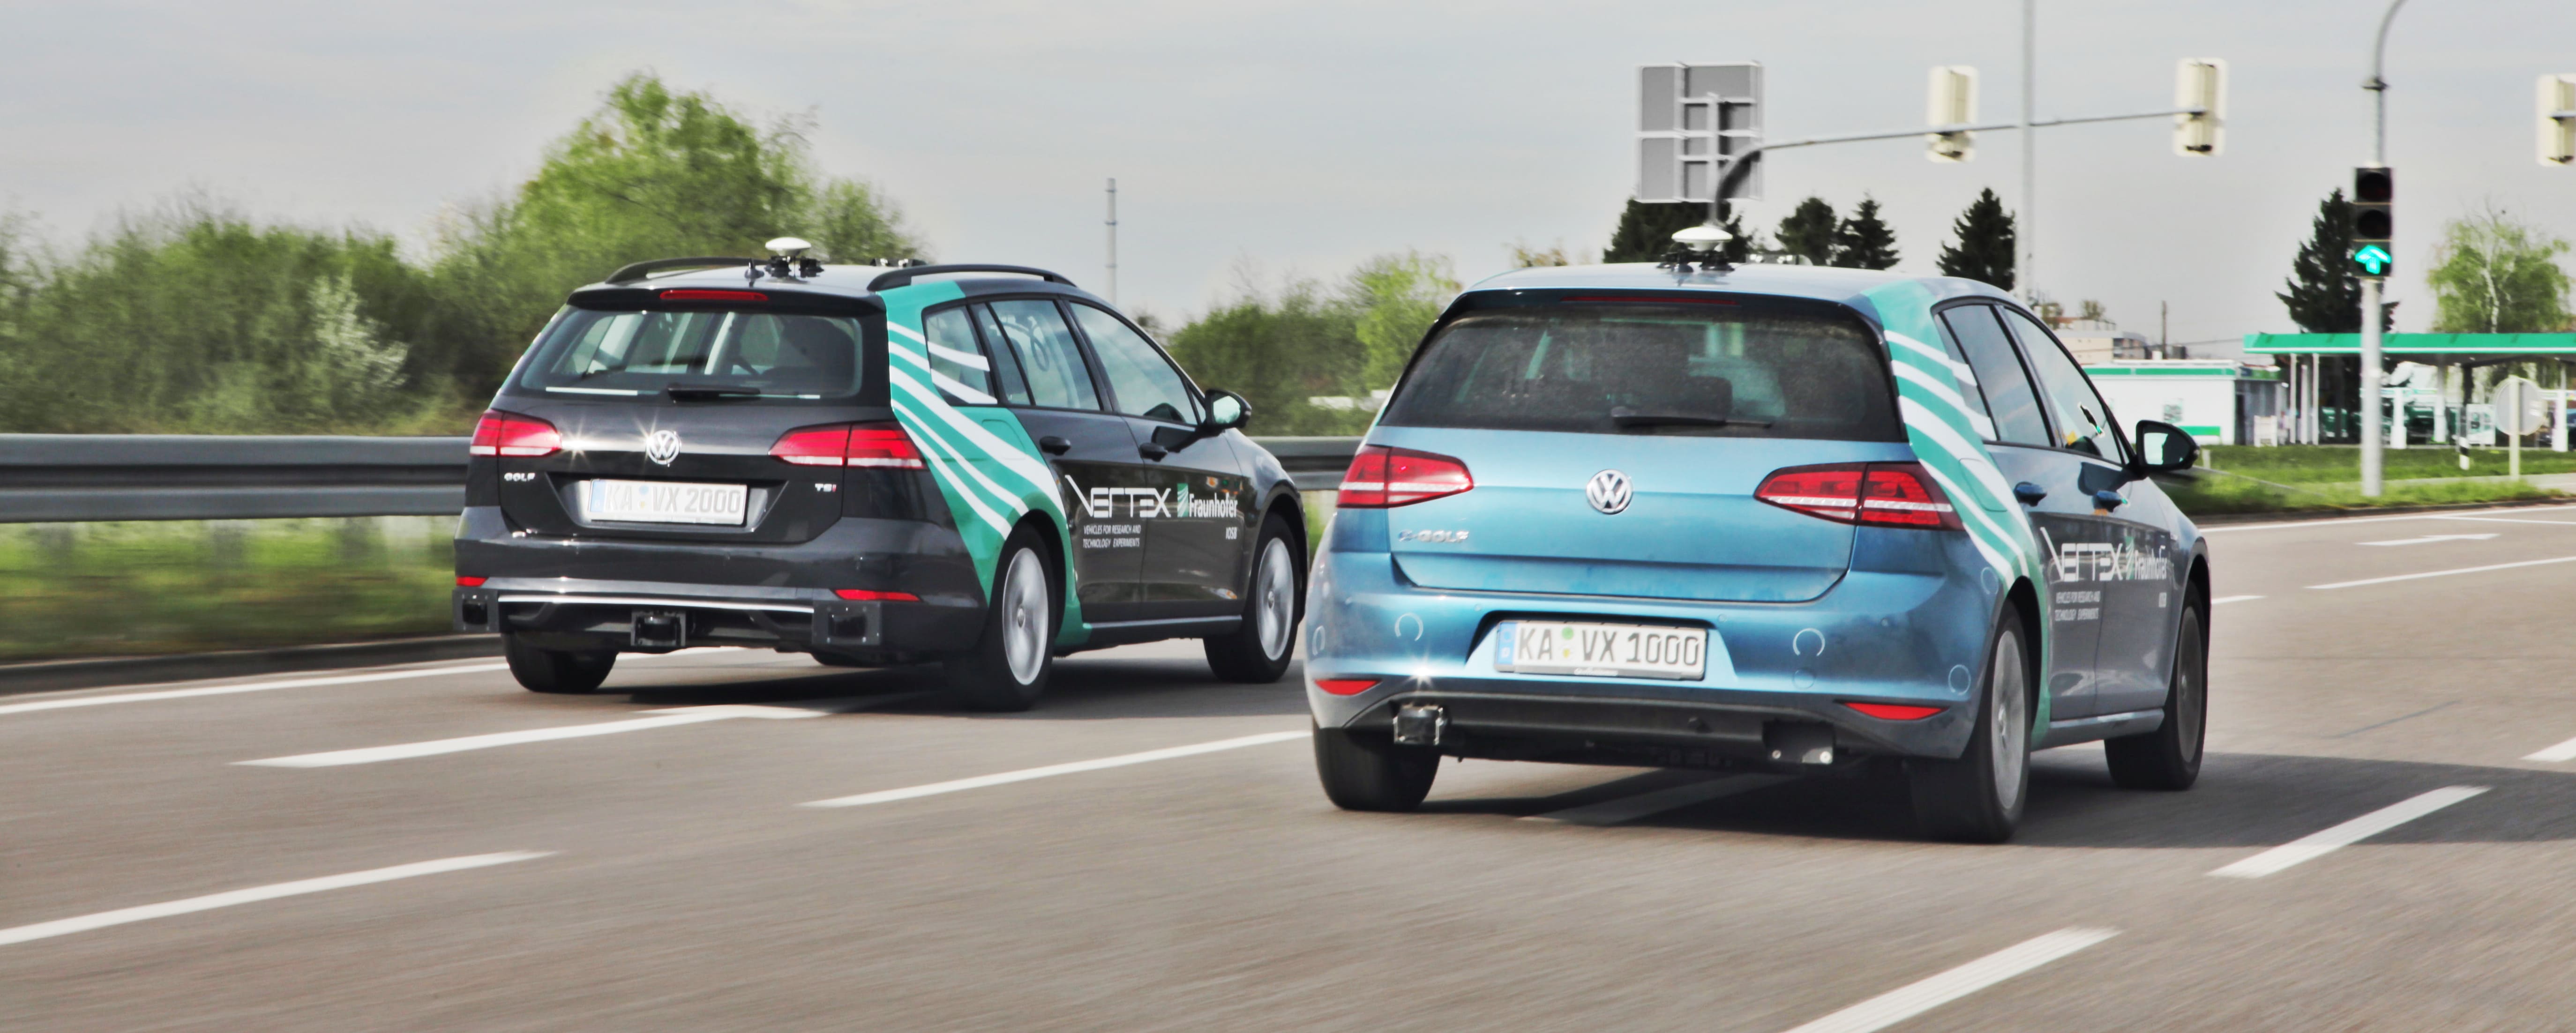 The IOSB offers two test vehicles converted for fully automatic driving - E-Golf 7 and Golf Variant - with redundant sensor technology.